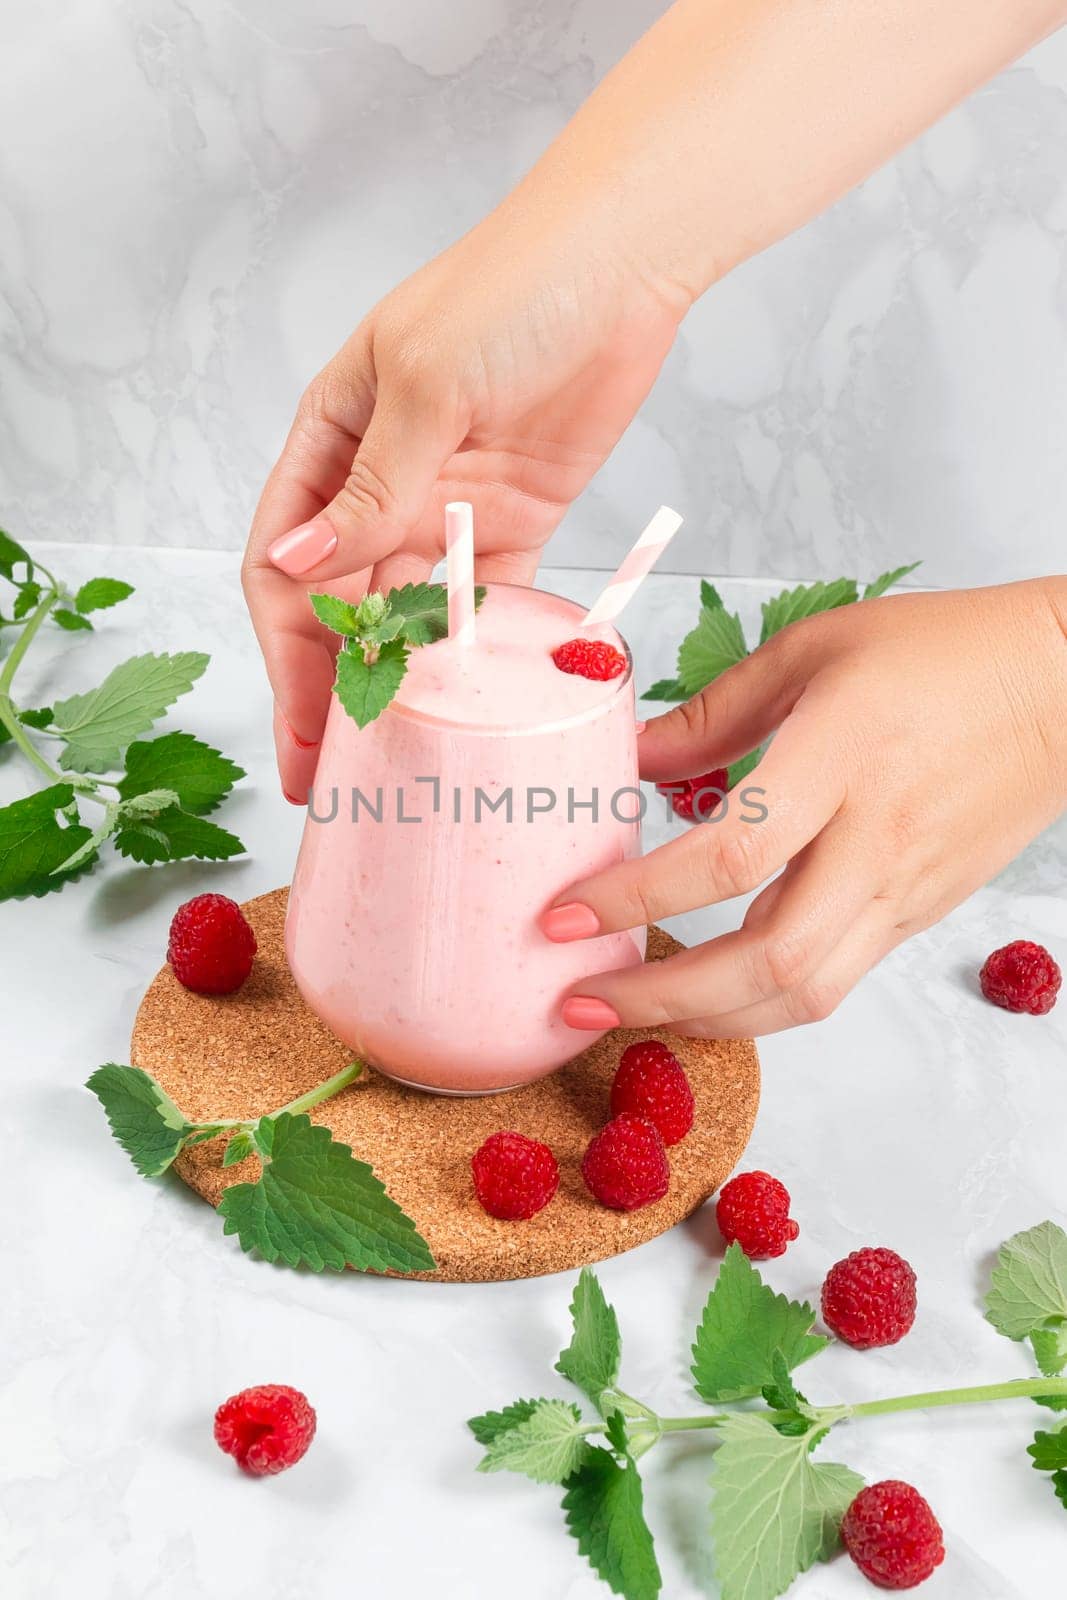 Women's hands put a milkshake with raspberries in a glass glass on the table